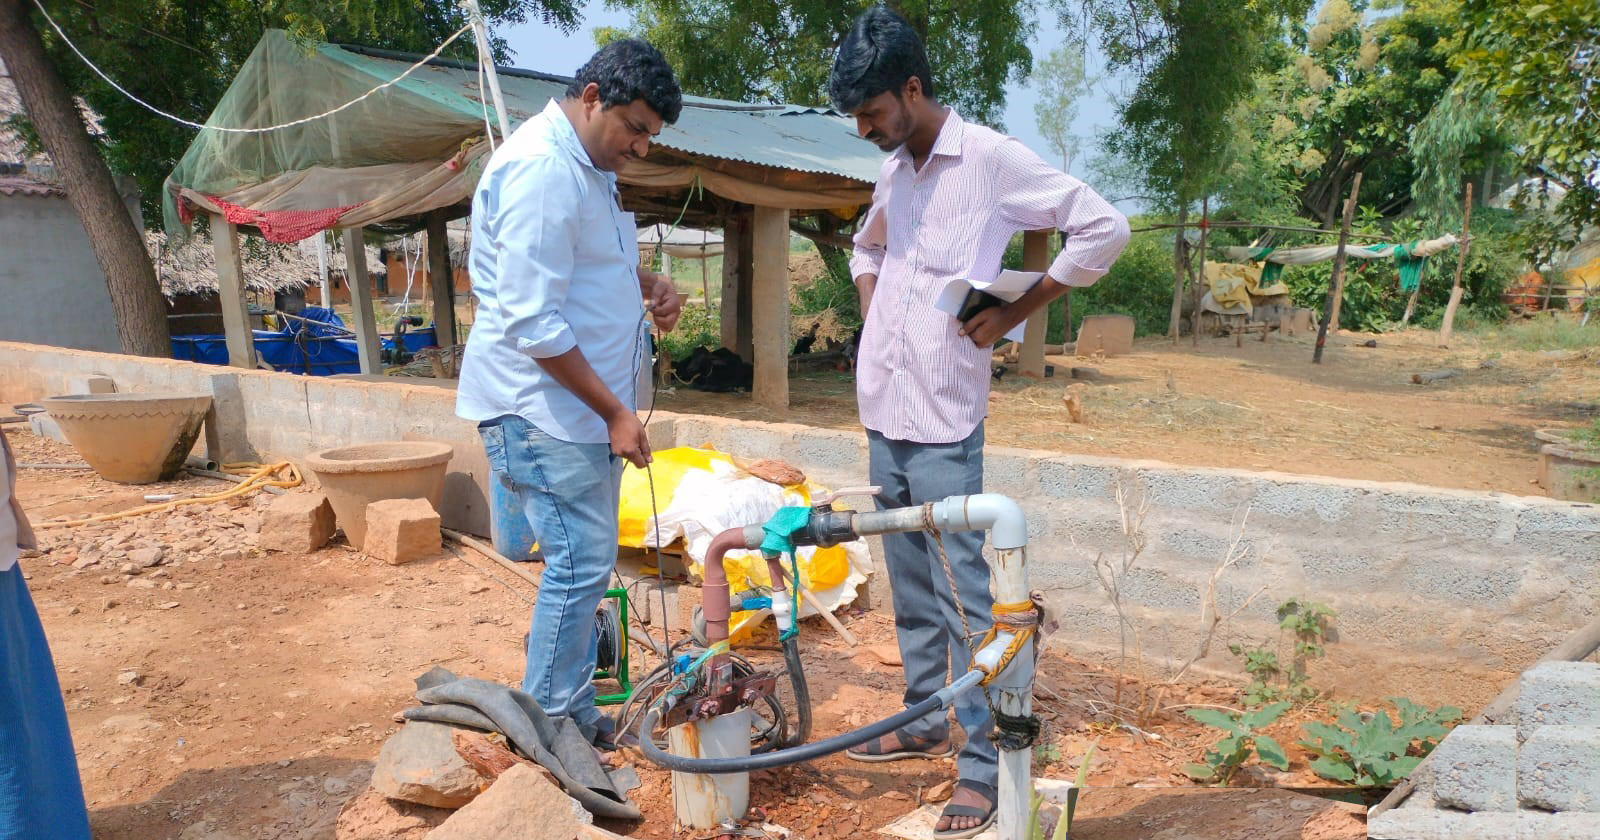 Bala Vikasa CSRB conducts Impact Assessment and SROI for Various Development Projects in Water Conservation, Livelihoods and Women Empowerment Sectors